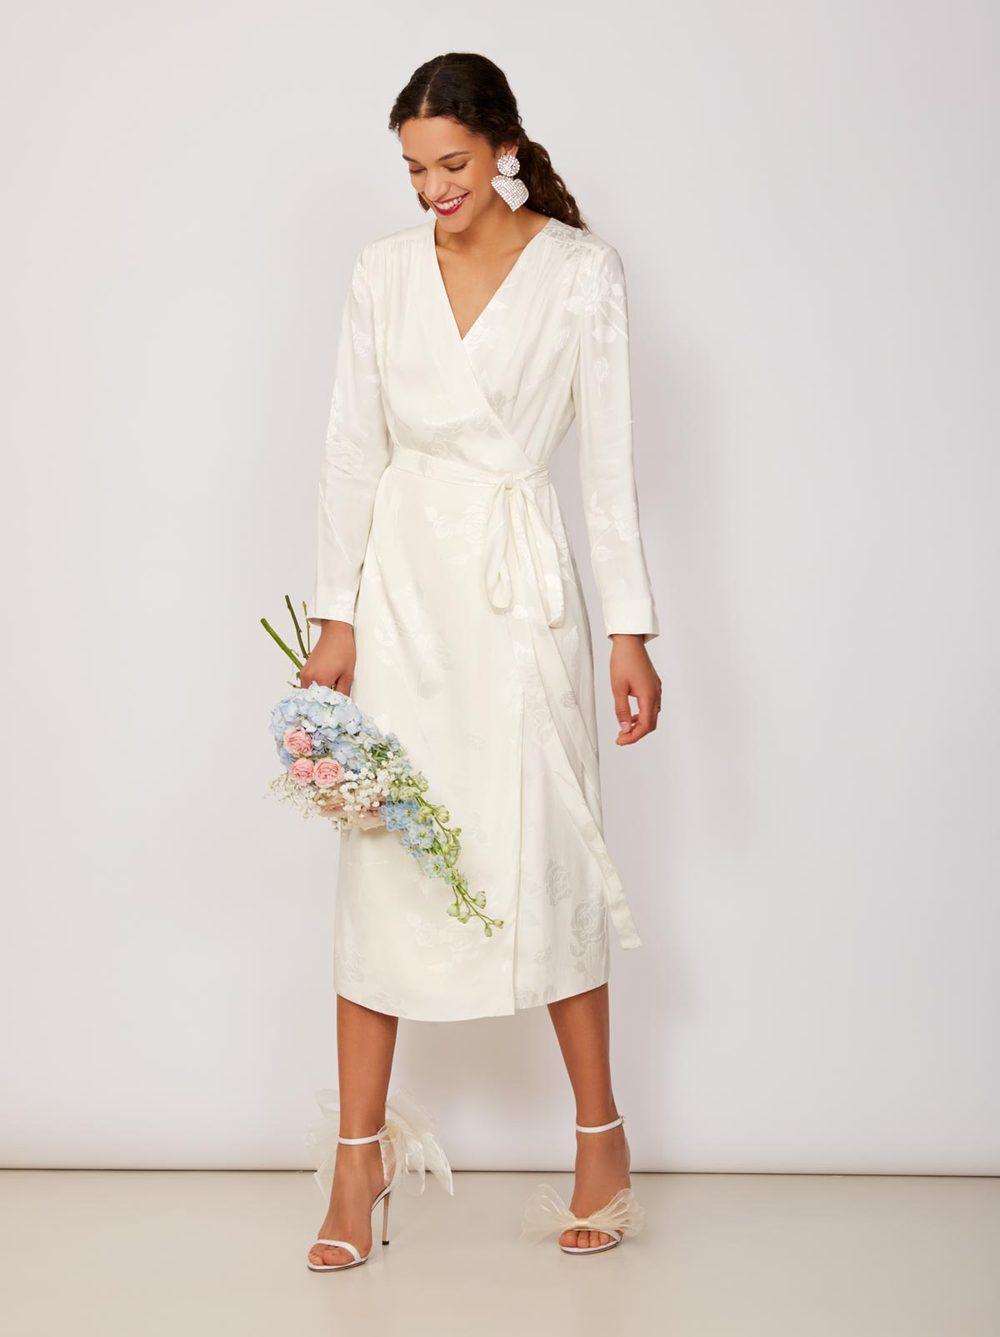 30 Beautiful Vow Renewal Dresses 2021 - hitched.co.uk